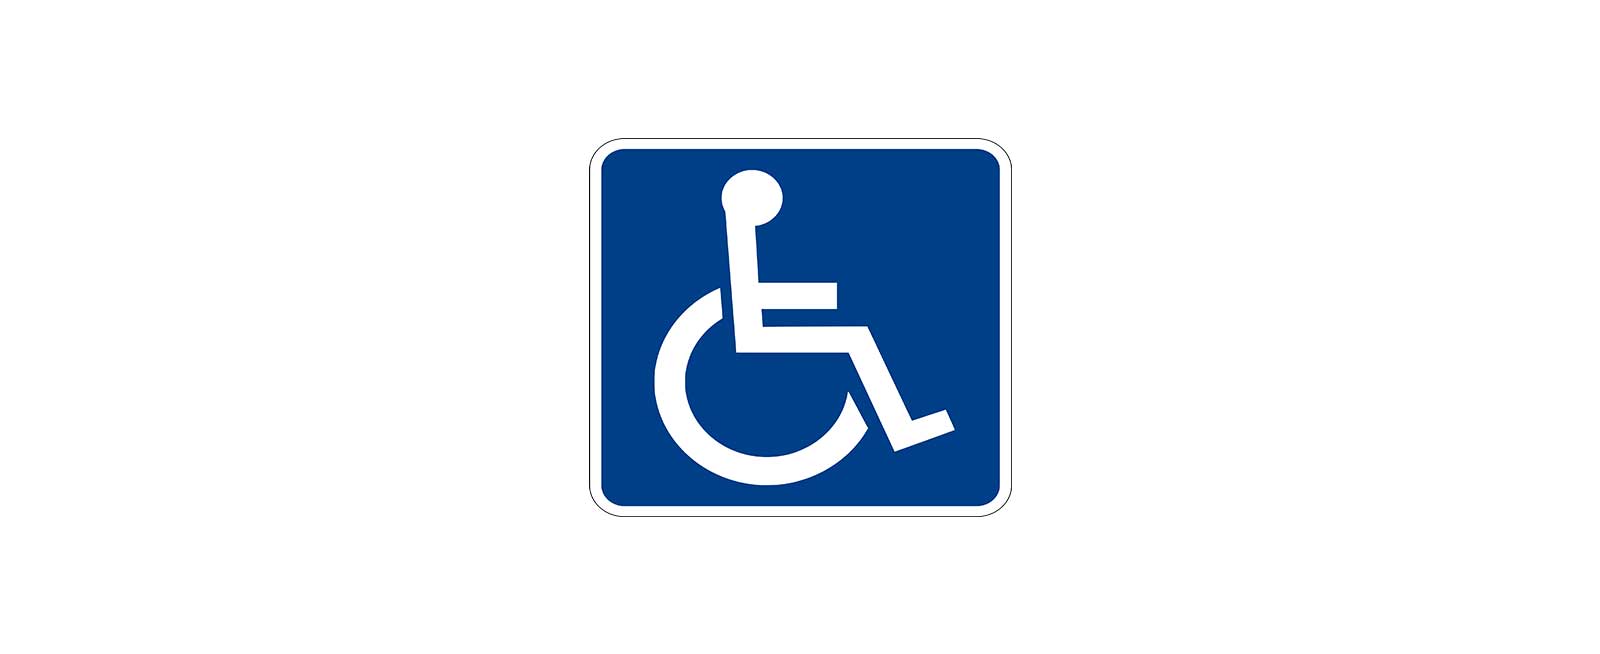 We provide wheelchair accessible minibuses